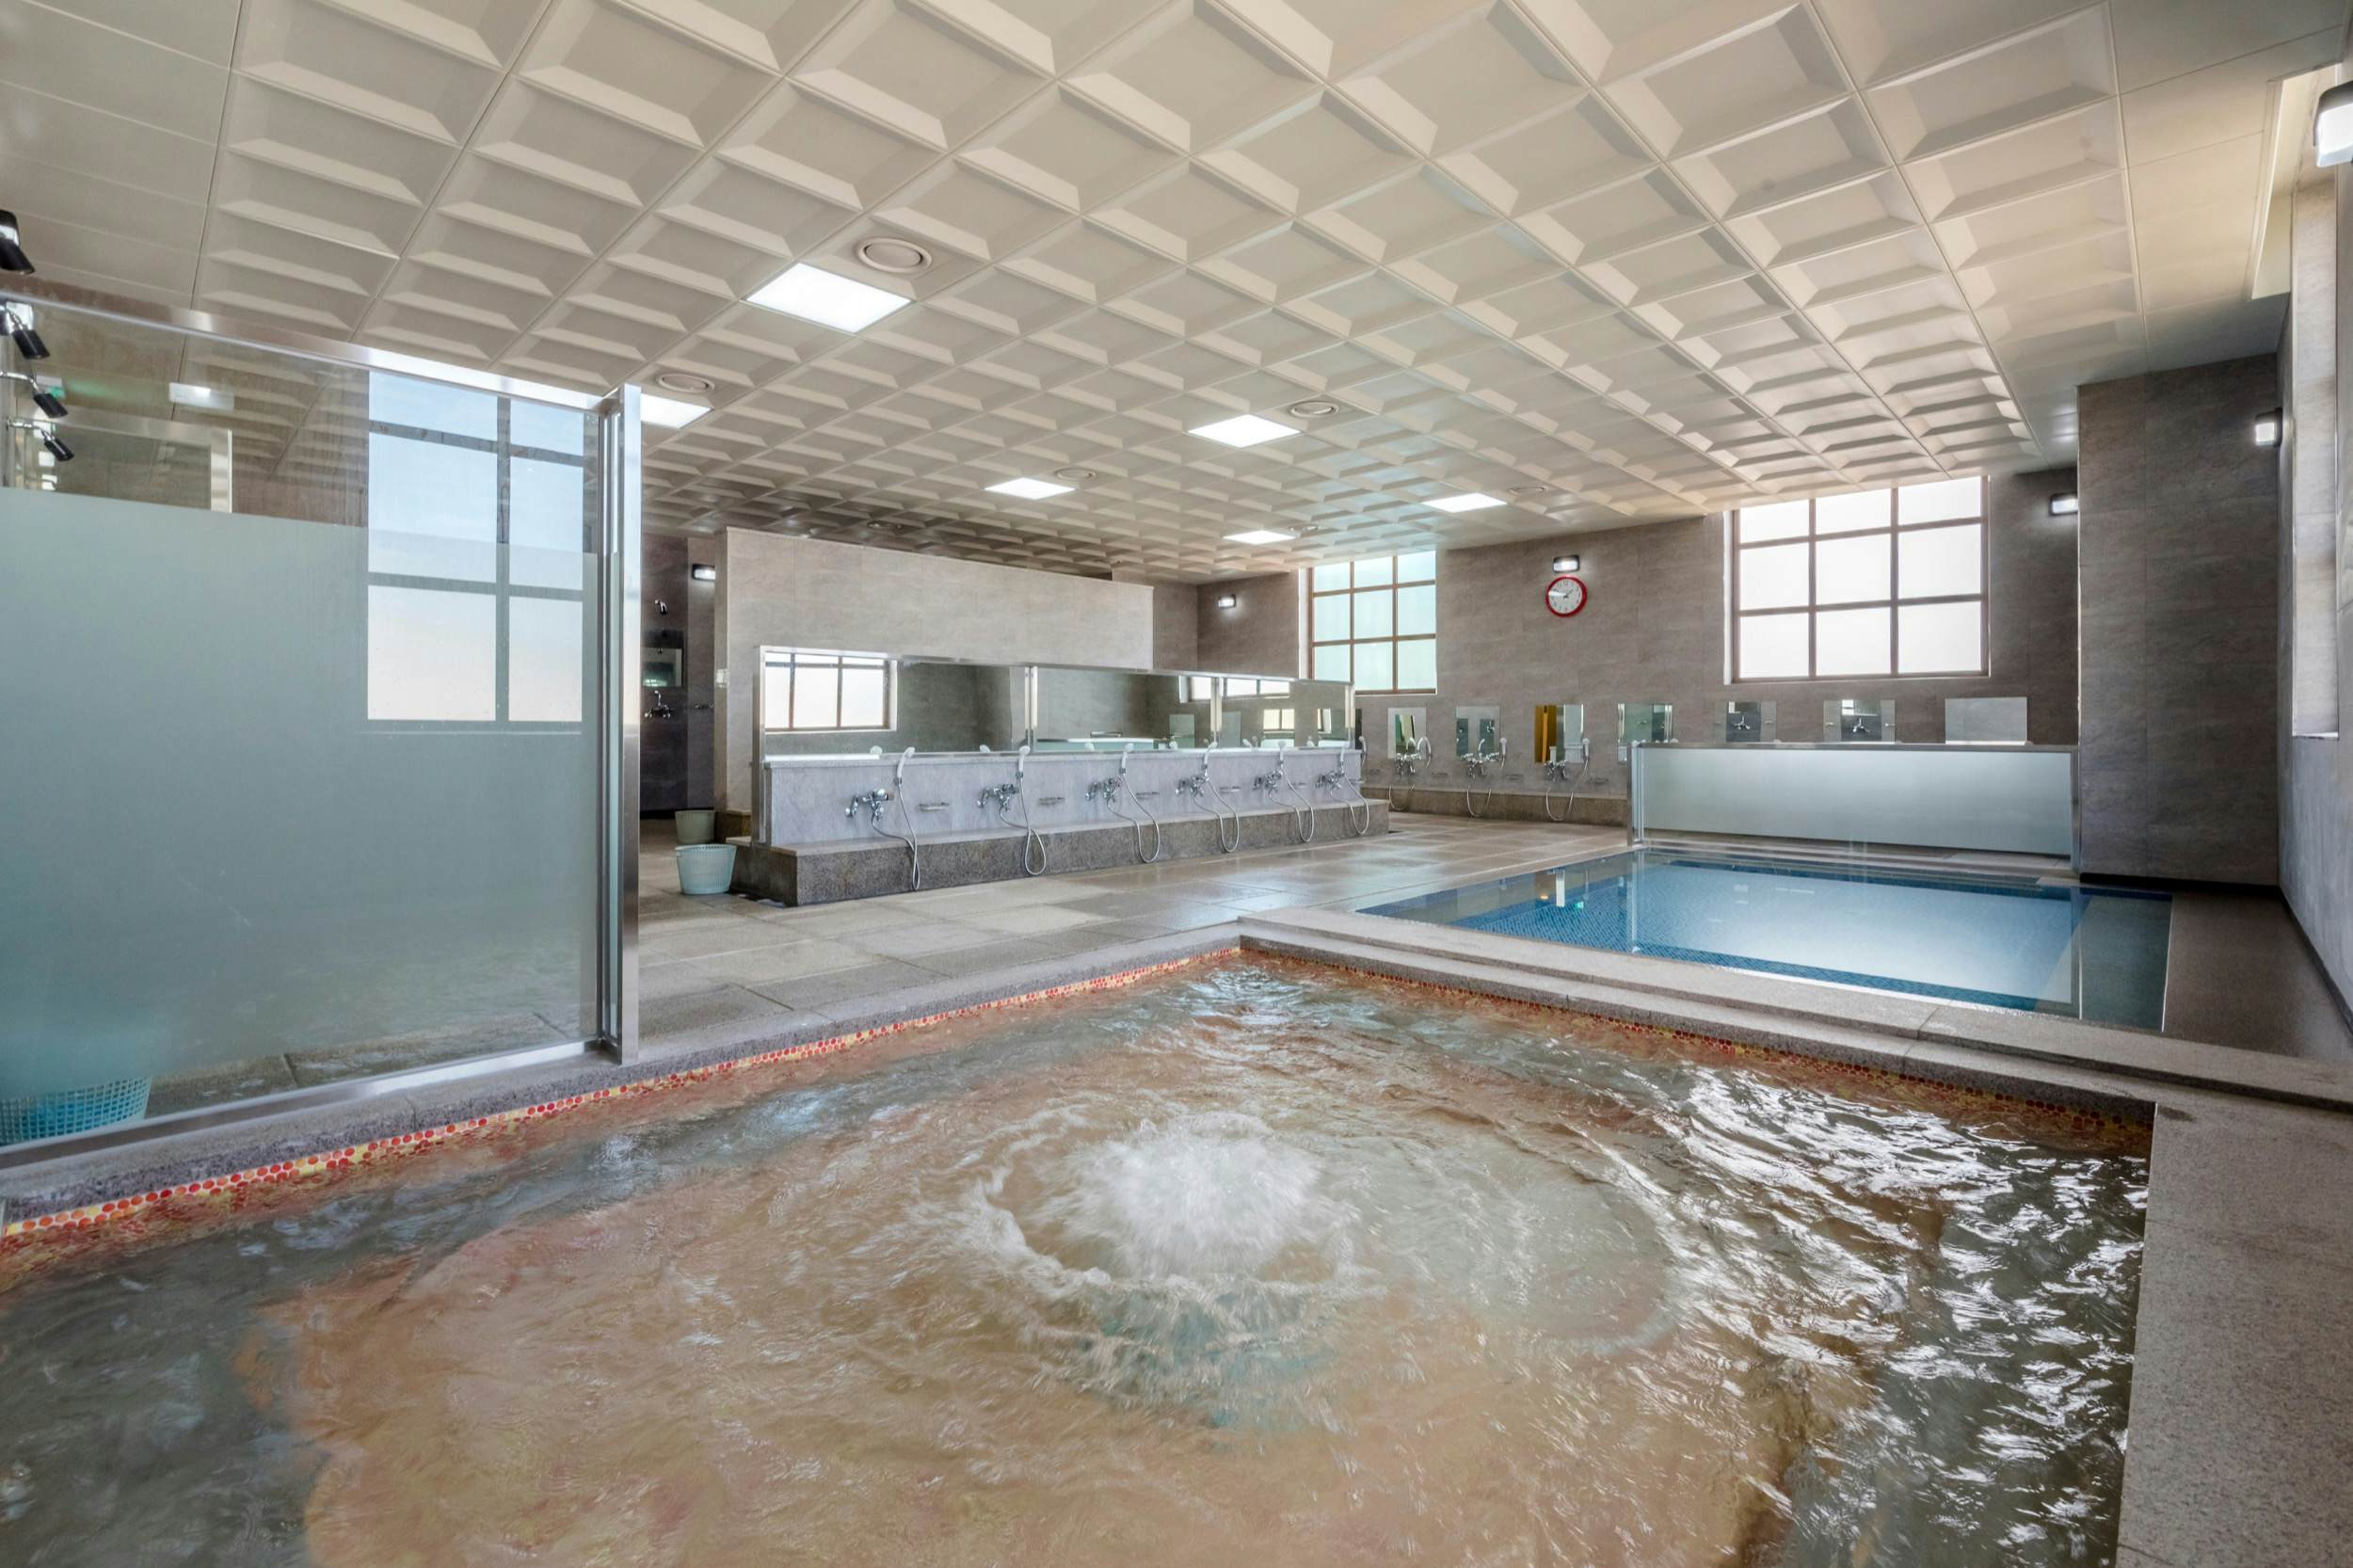 How to visit a Korean bathhouse for the first time - Lonely Planet